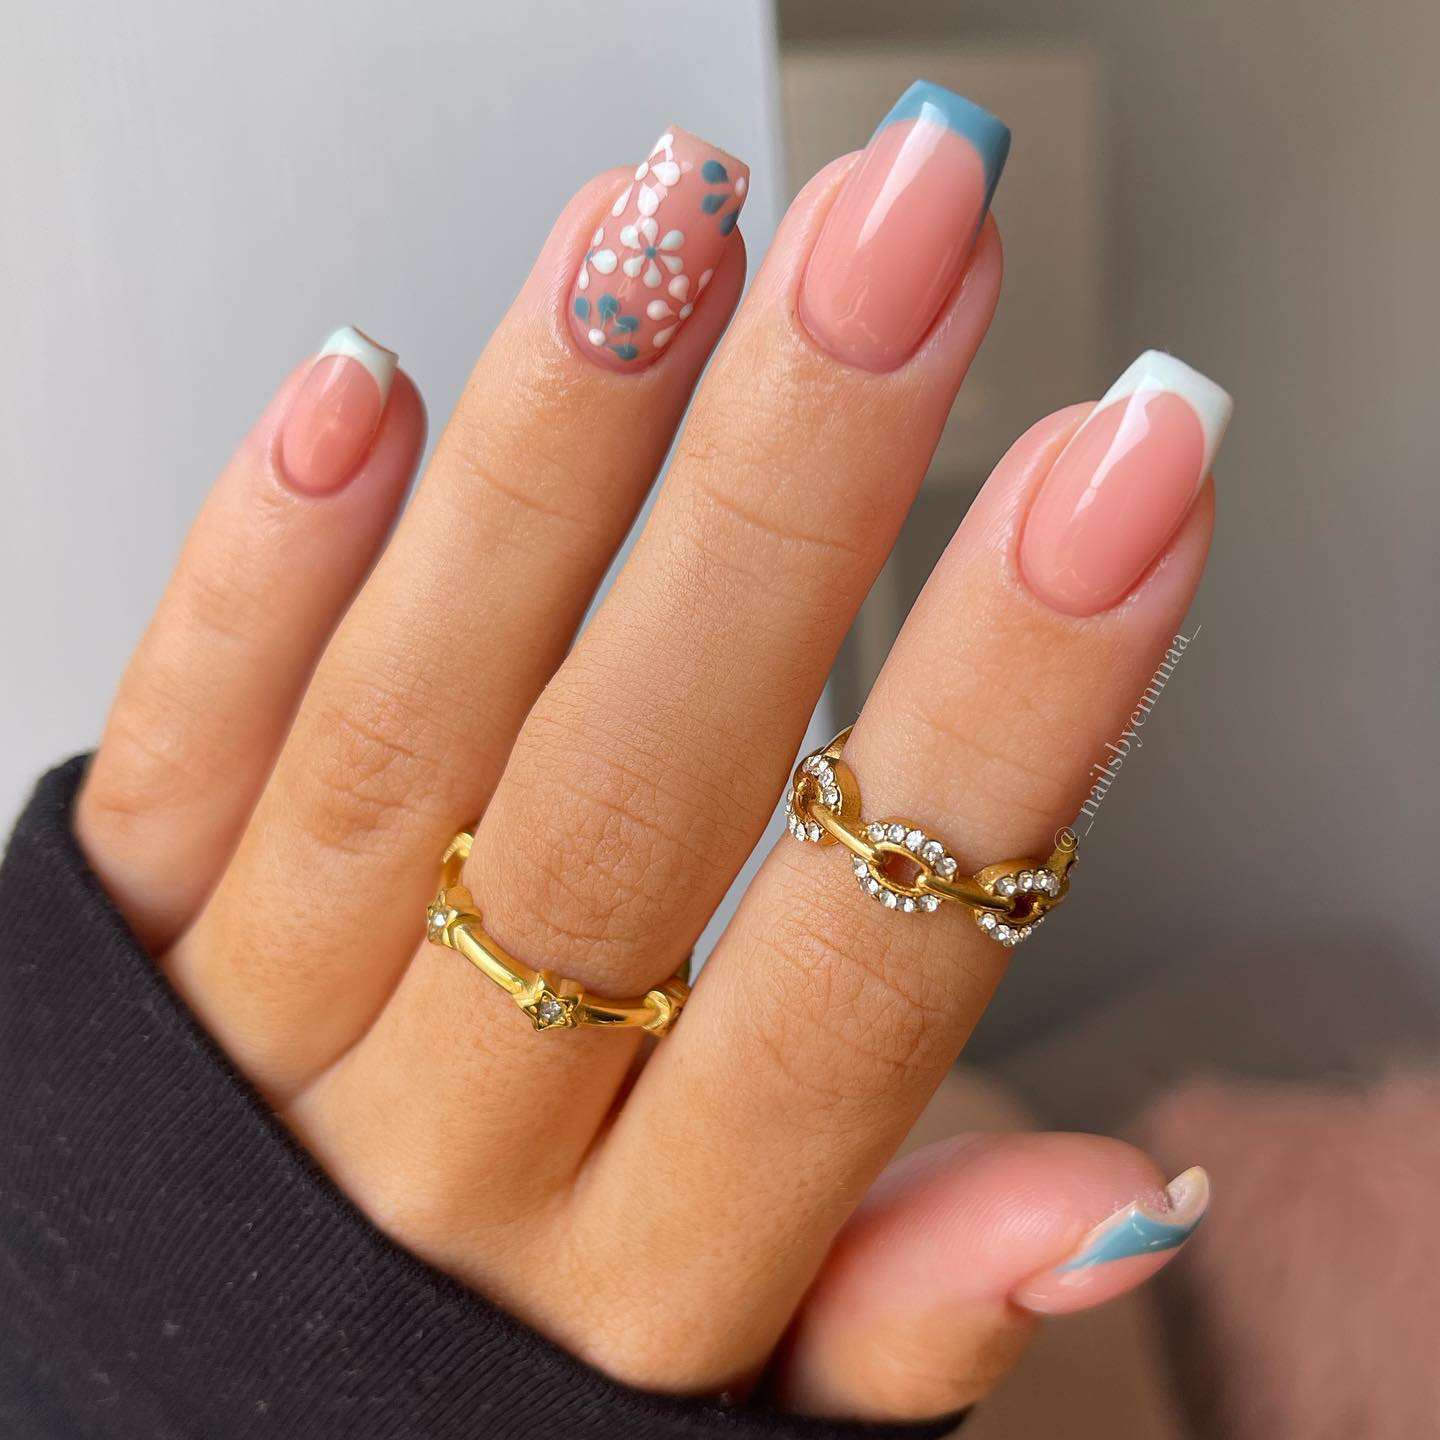 50 Best Nail Designs Trends To Try Out In 2022 images 1